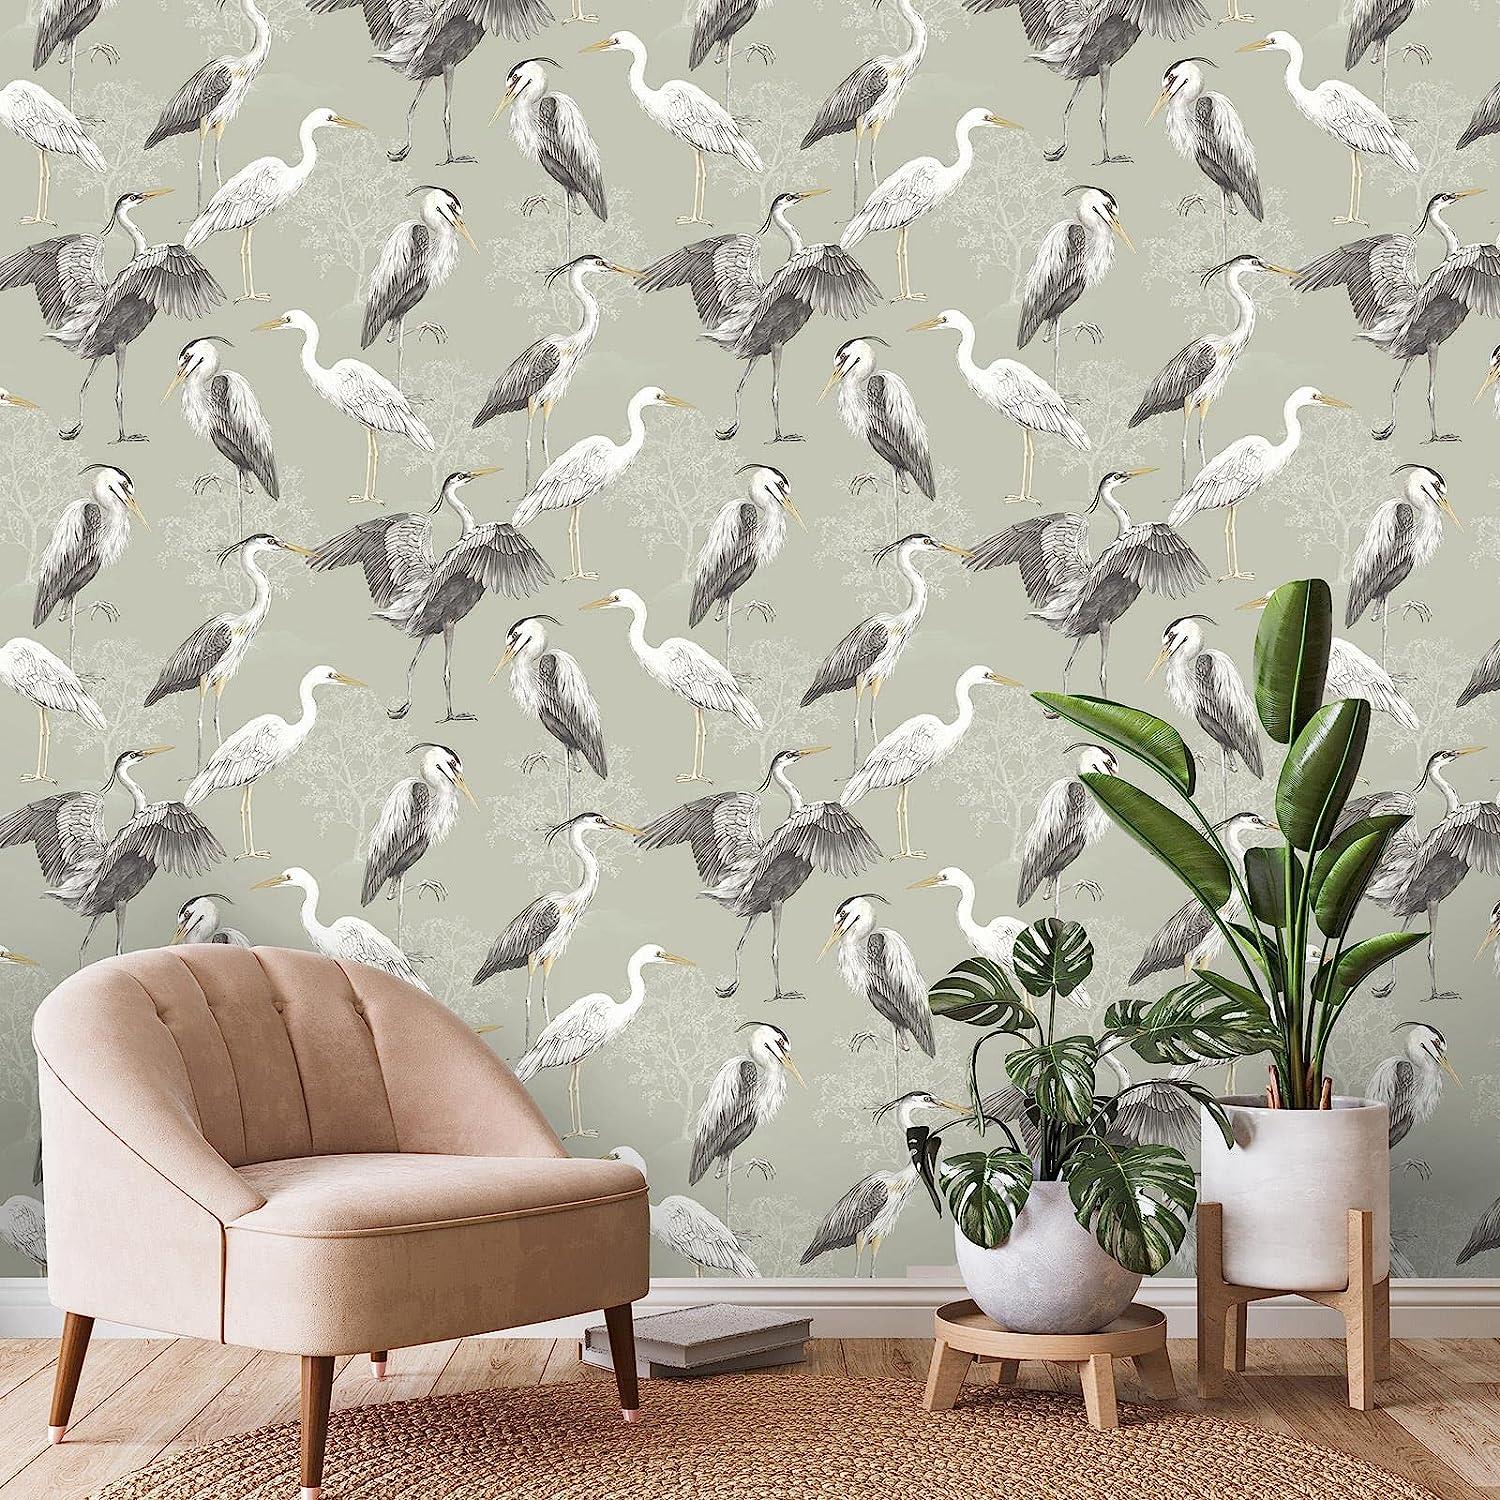 RASCH (U.K) Limited Dimension Heron Wallpaper - Modern Wallpaper for Living Room, Bedroom, Fireplace - Decorative Luxury Nature Wall Paper with Hand-Drawn Herons & Trees (White/Grey/Sage Green)